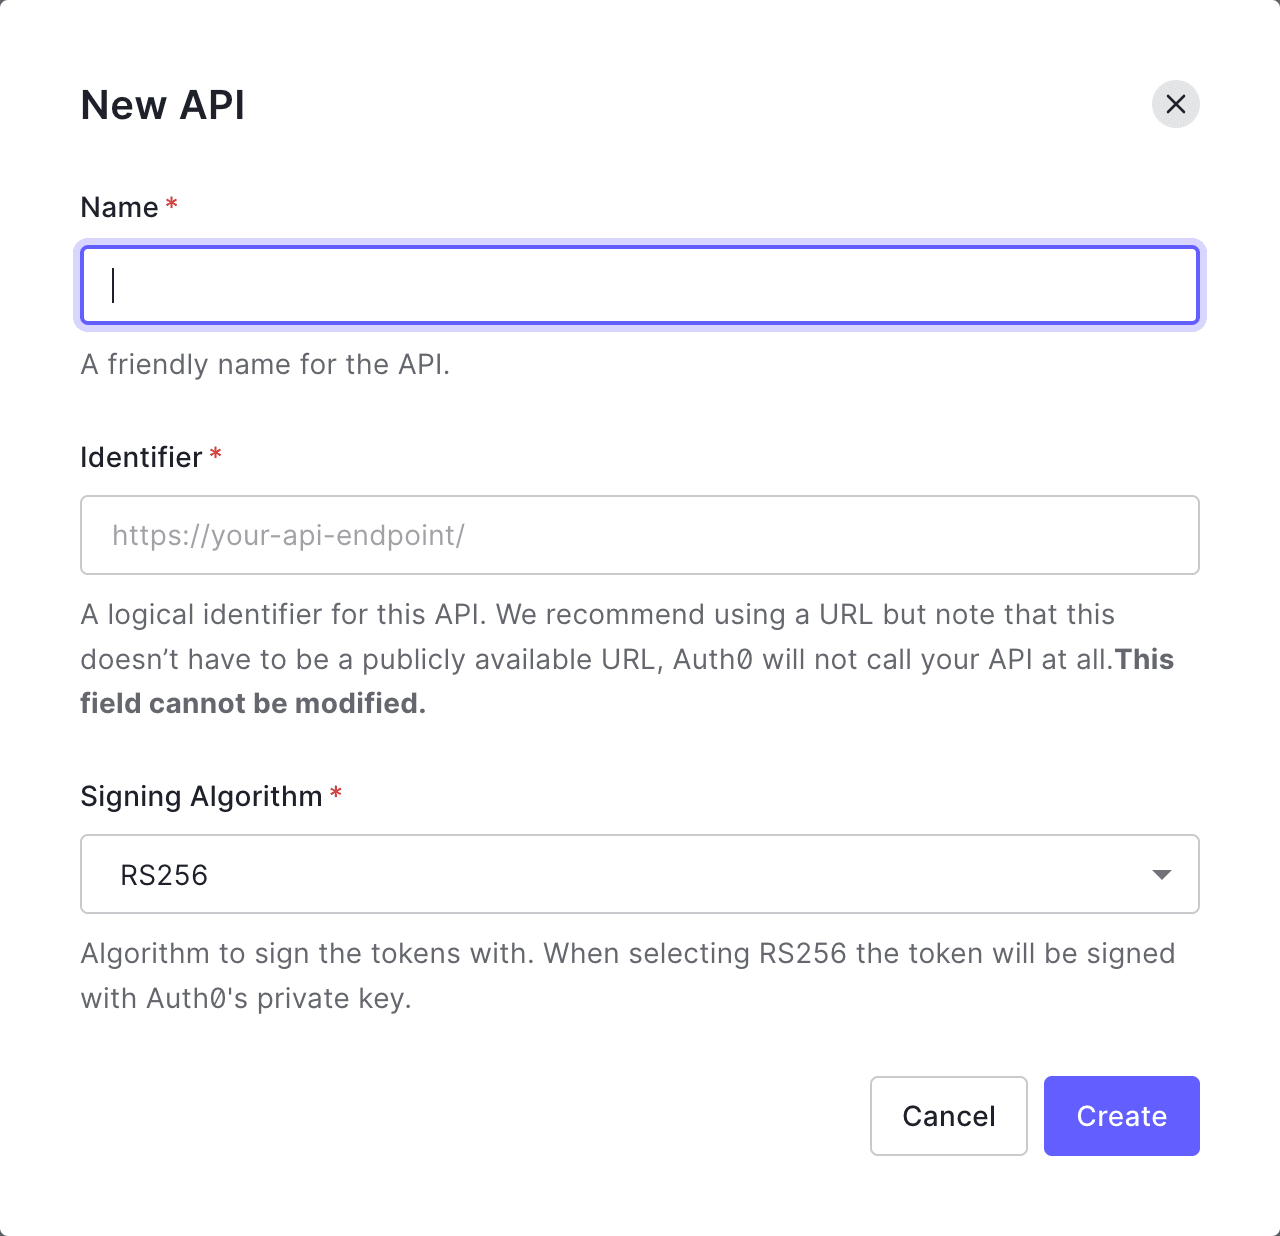 The New API screen in Auth0